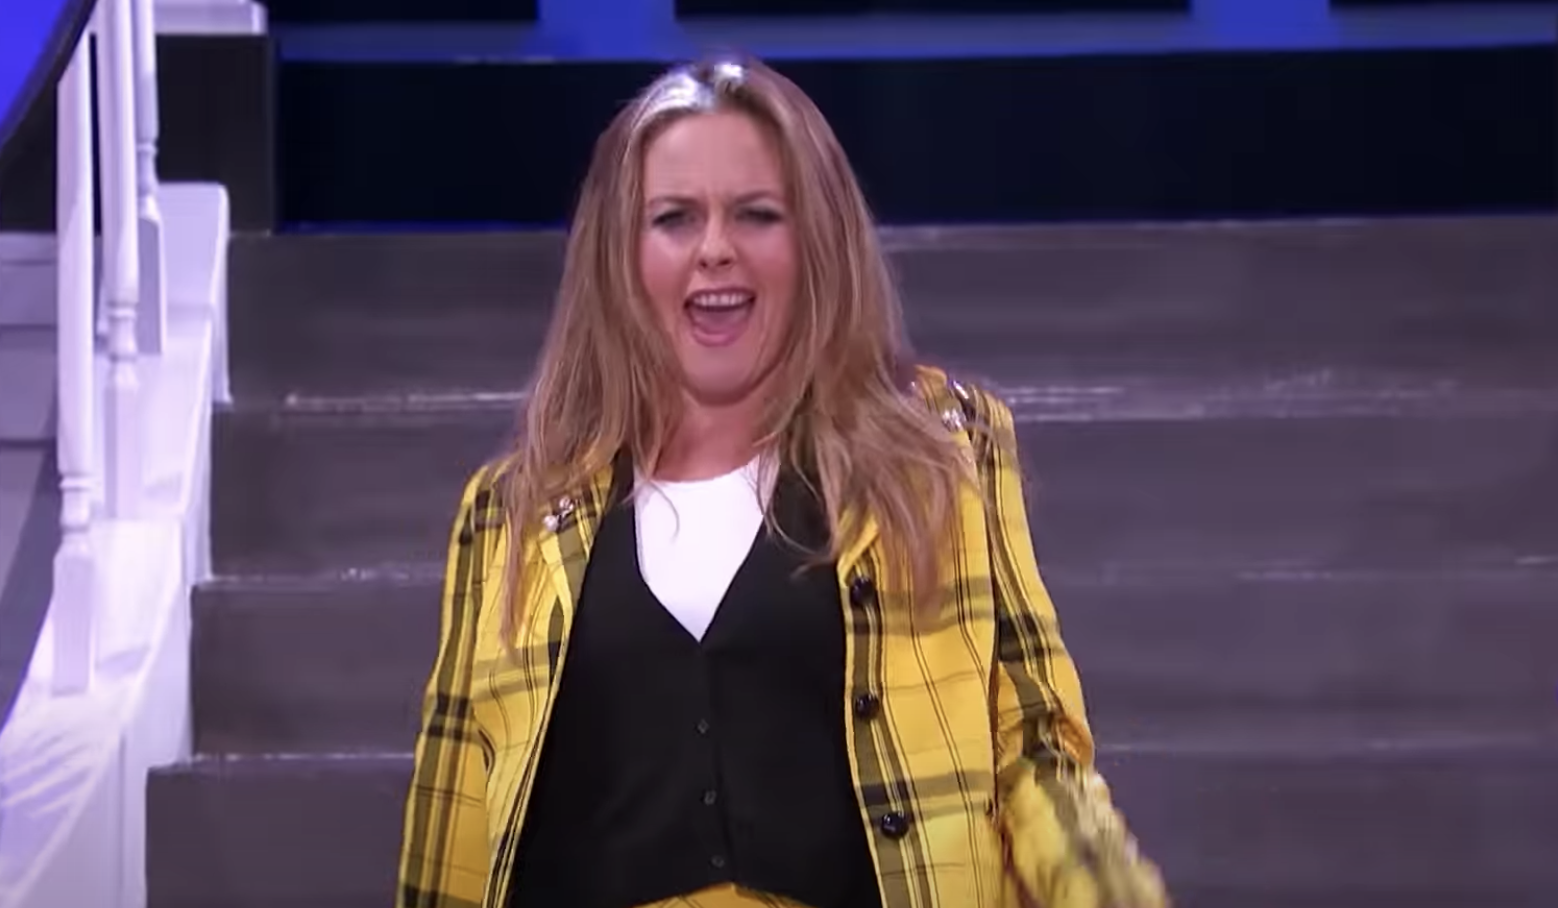 Alicia Silverstone dressed up like Cher from Clueless on Lip Sync Battle